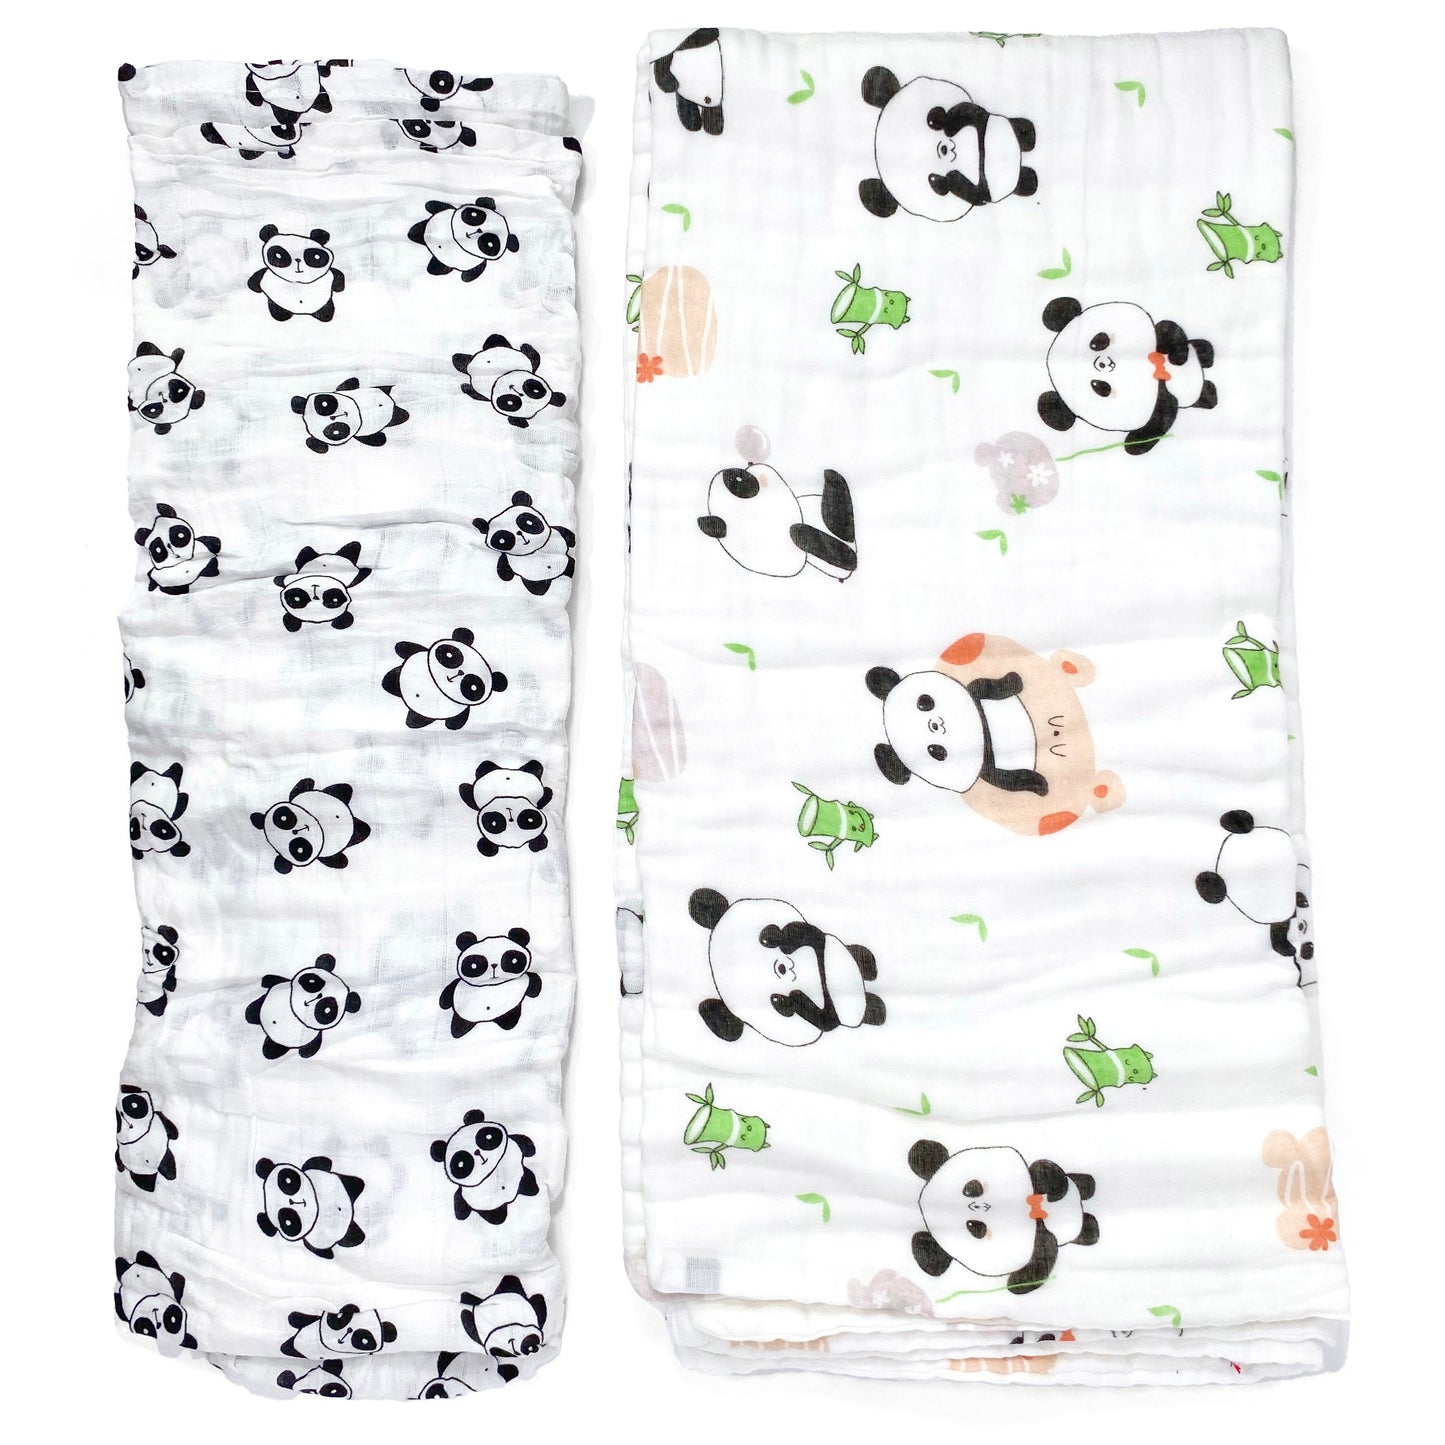 A set of two muslin baby blankets, one light swaddle blanket and one thick buggy blanket, with panda designs.